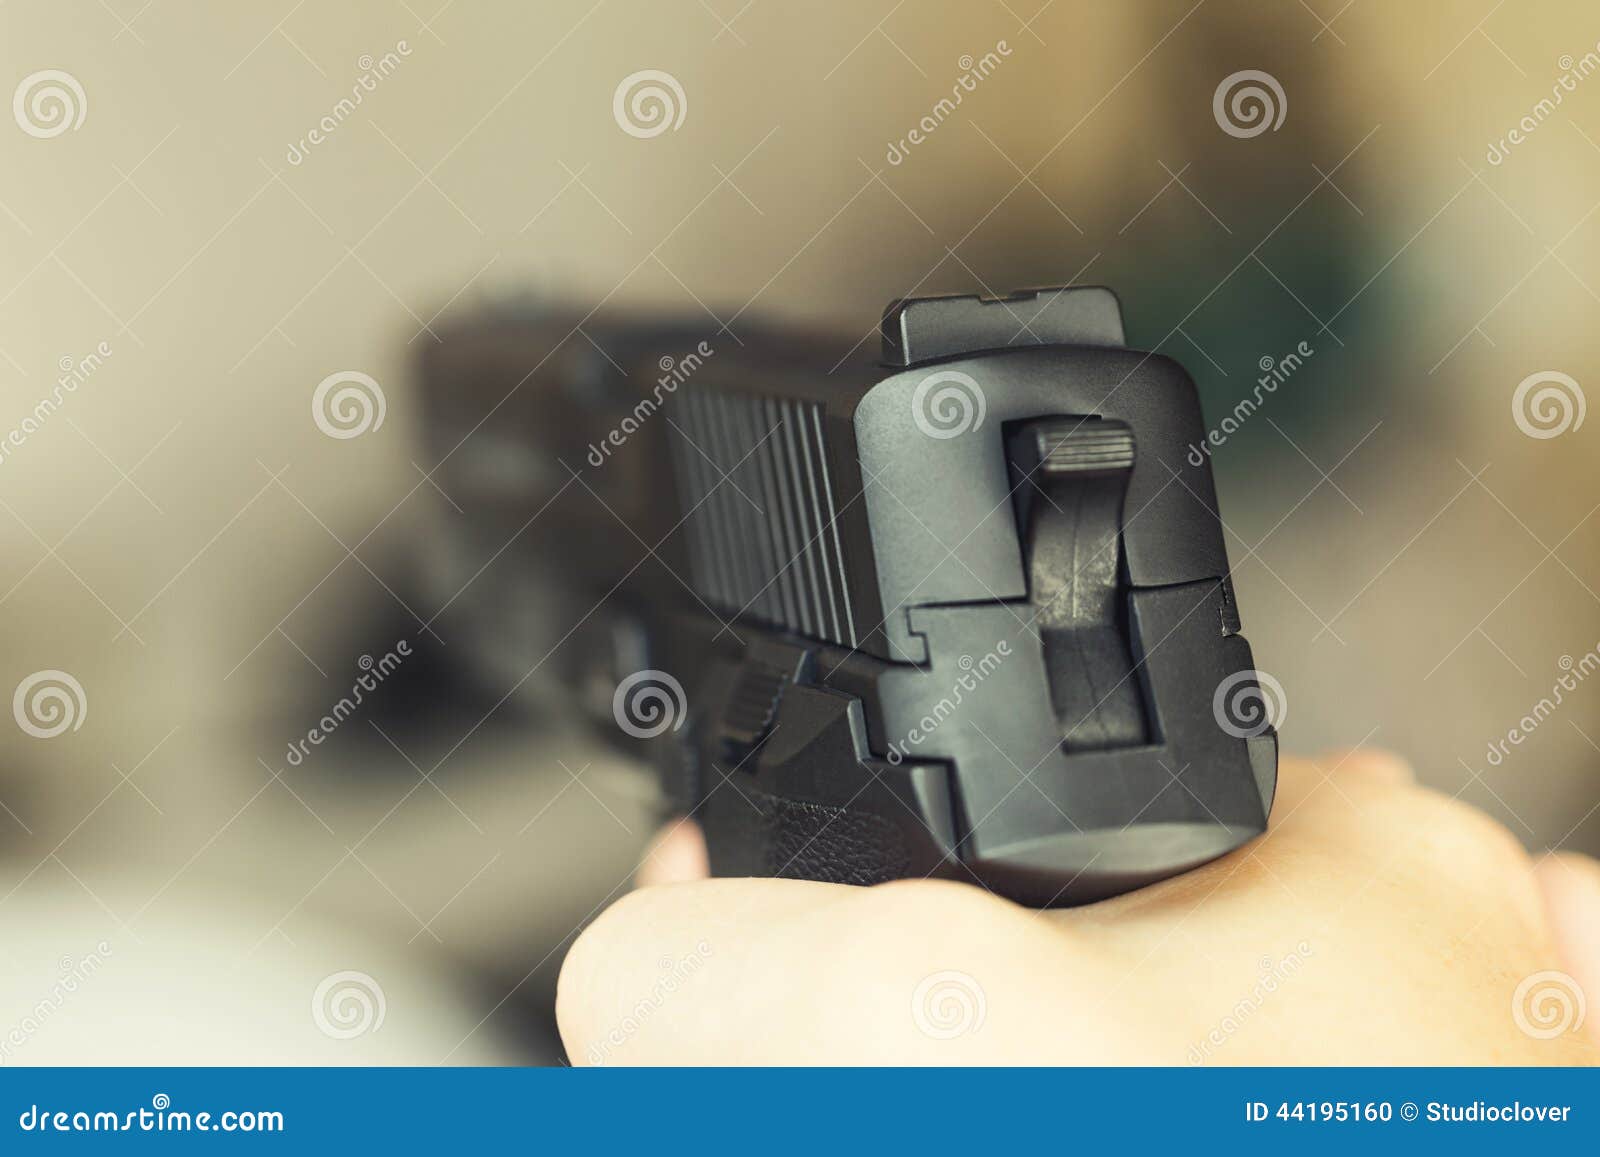 Serious Man Is Ready To Fire A Gun High-Res Stock Photo 